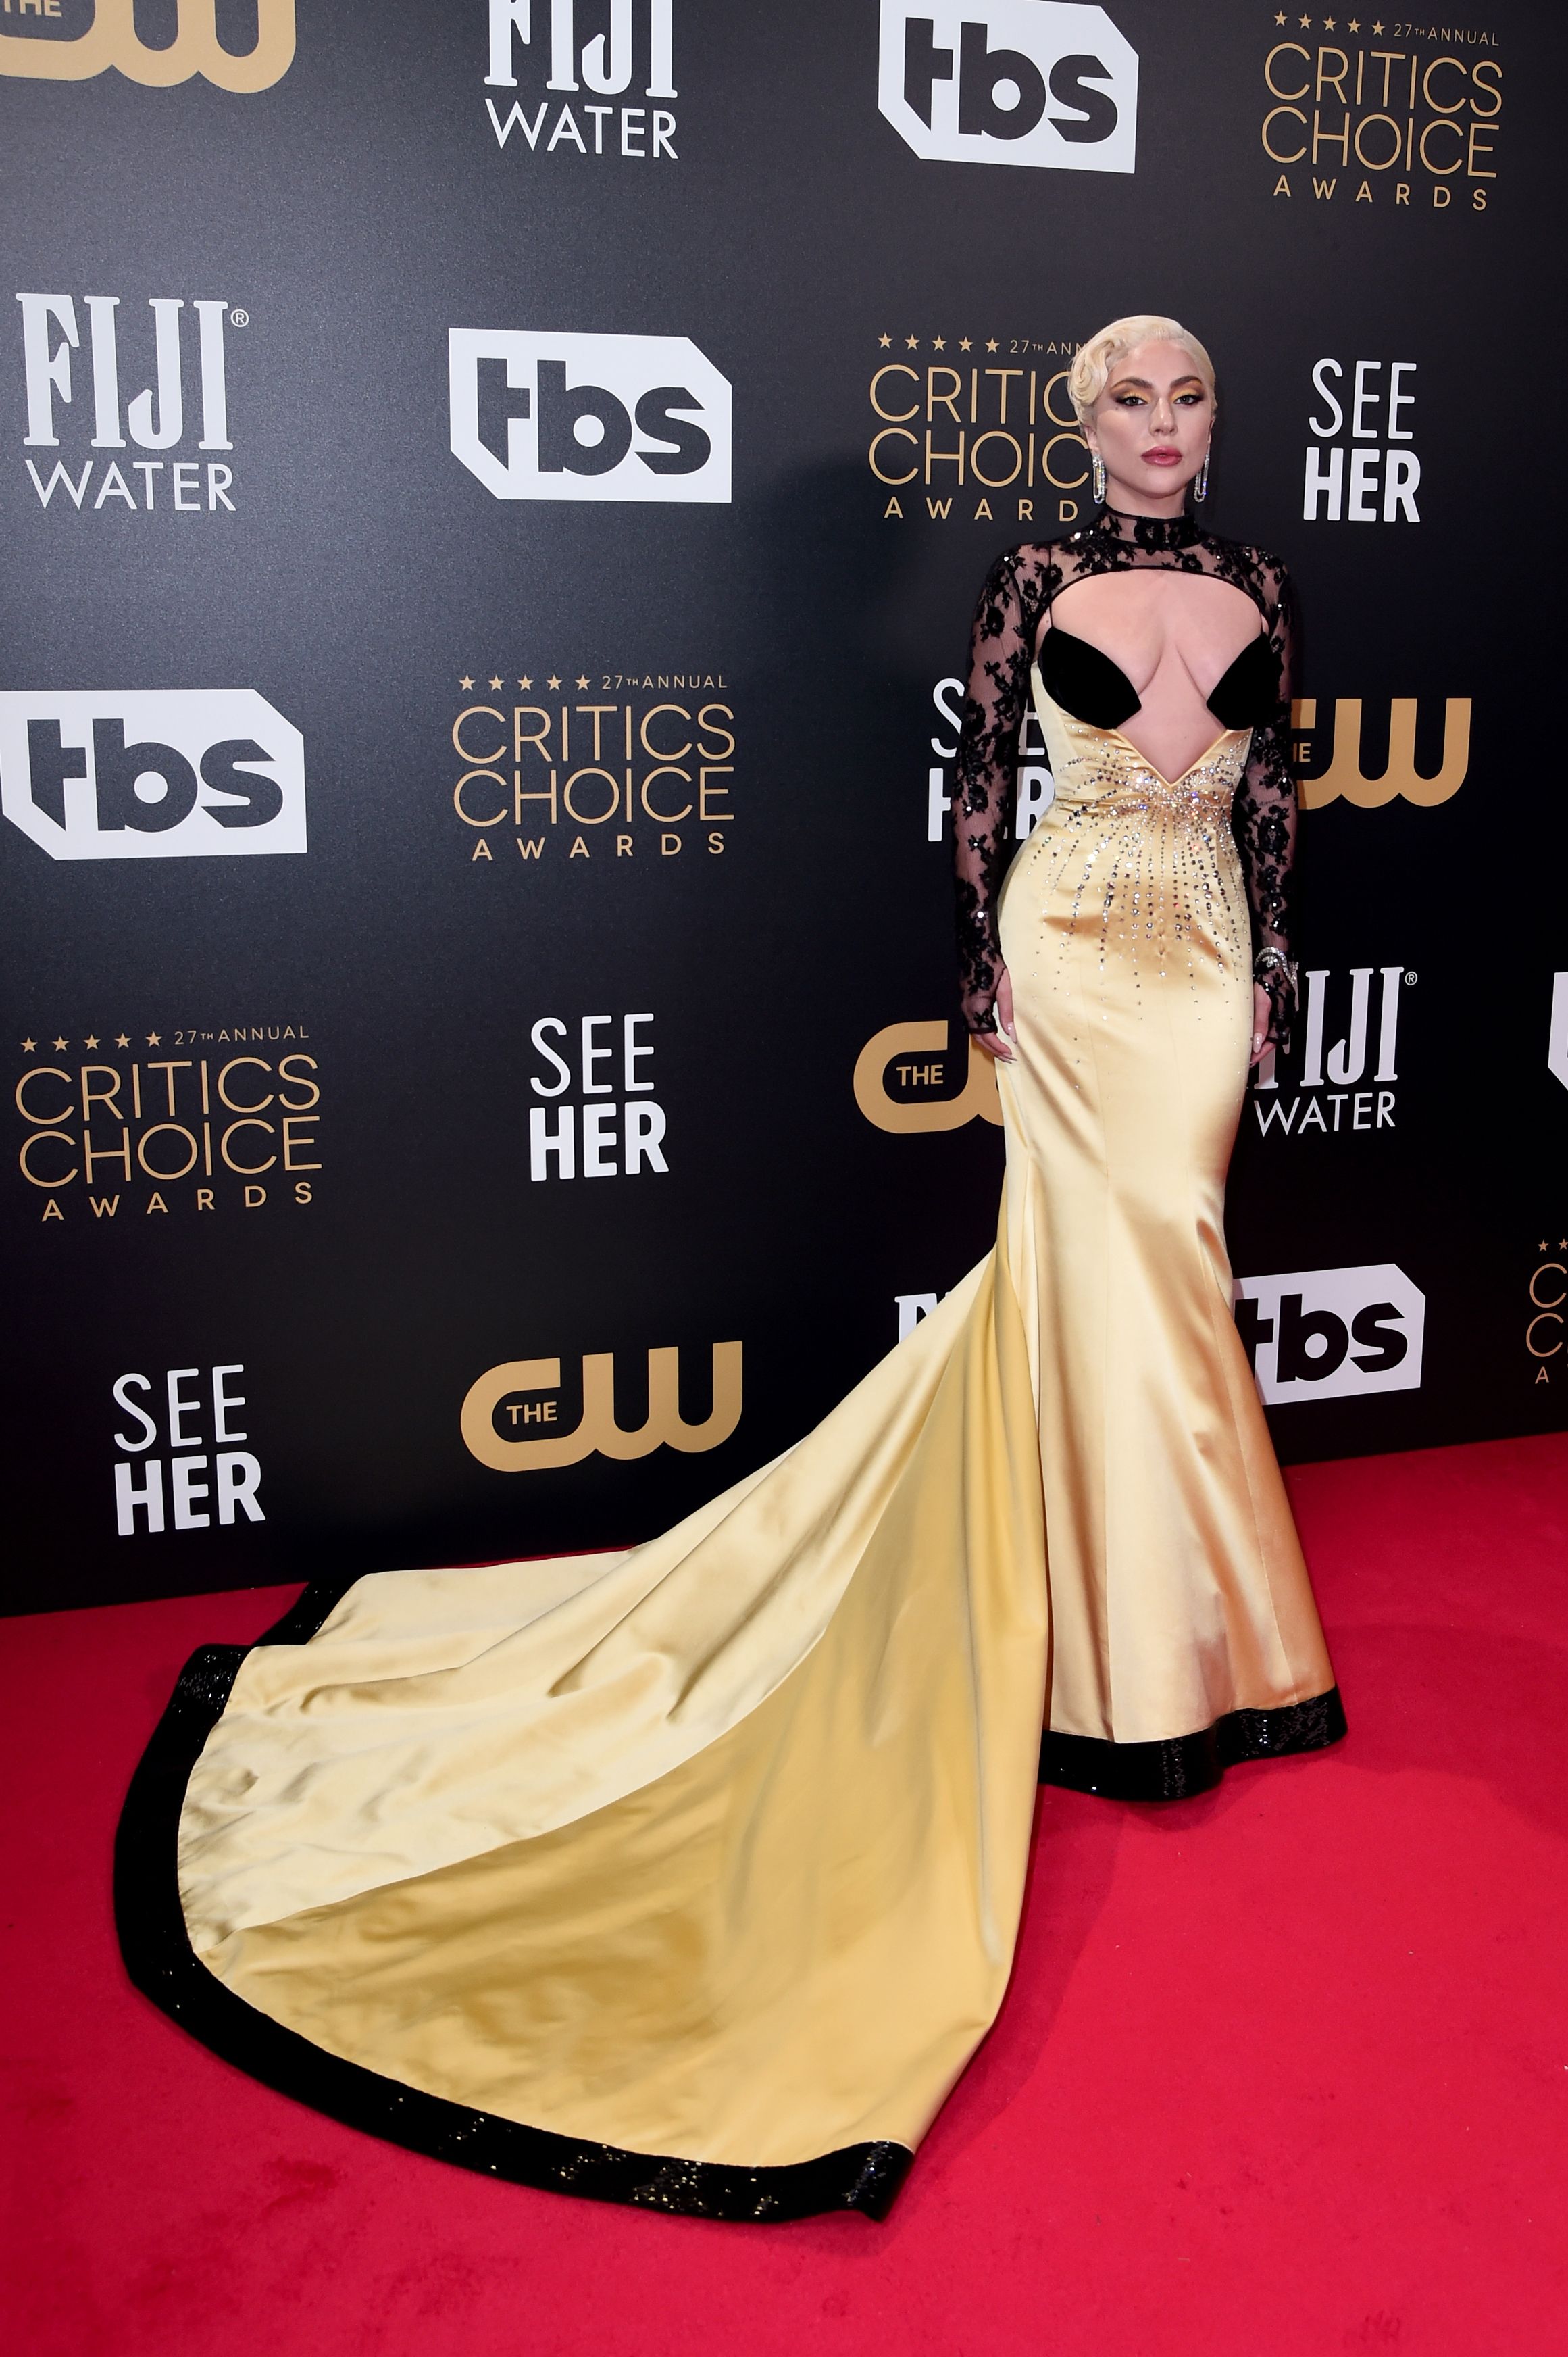 Critics' Choice Awards 2022: All the red carpet looks